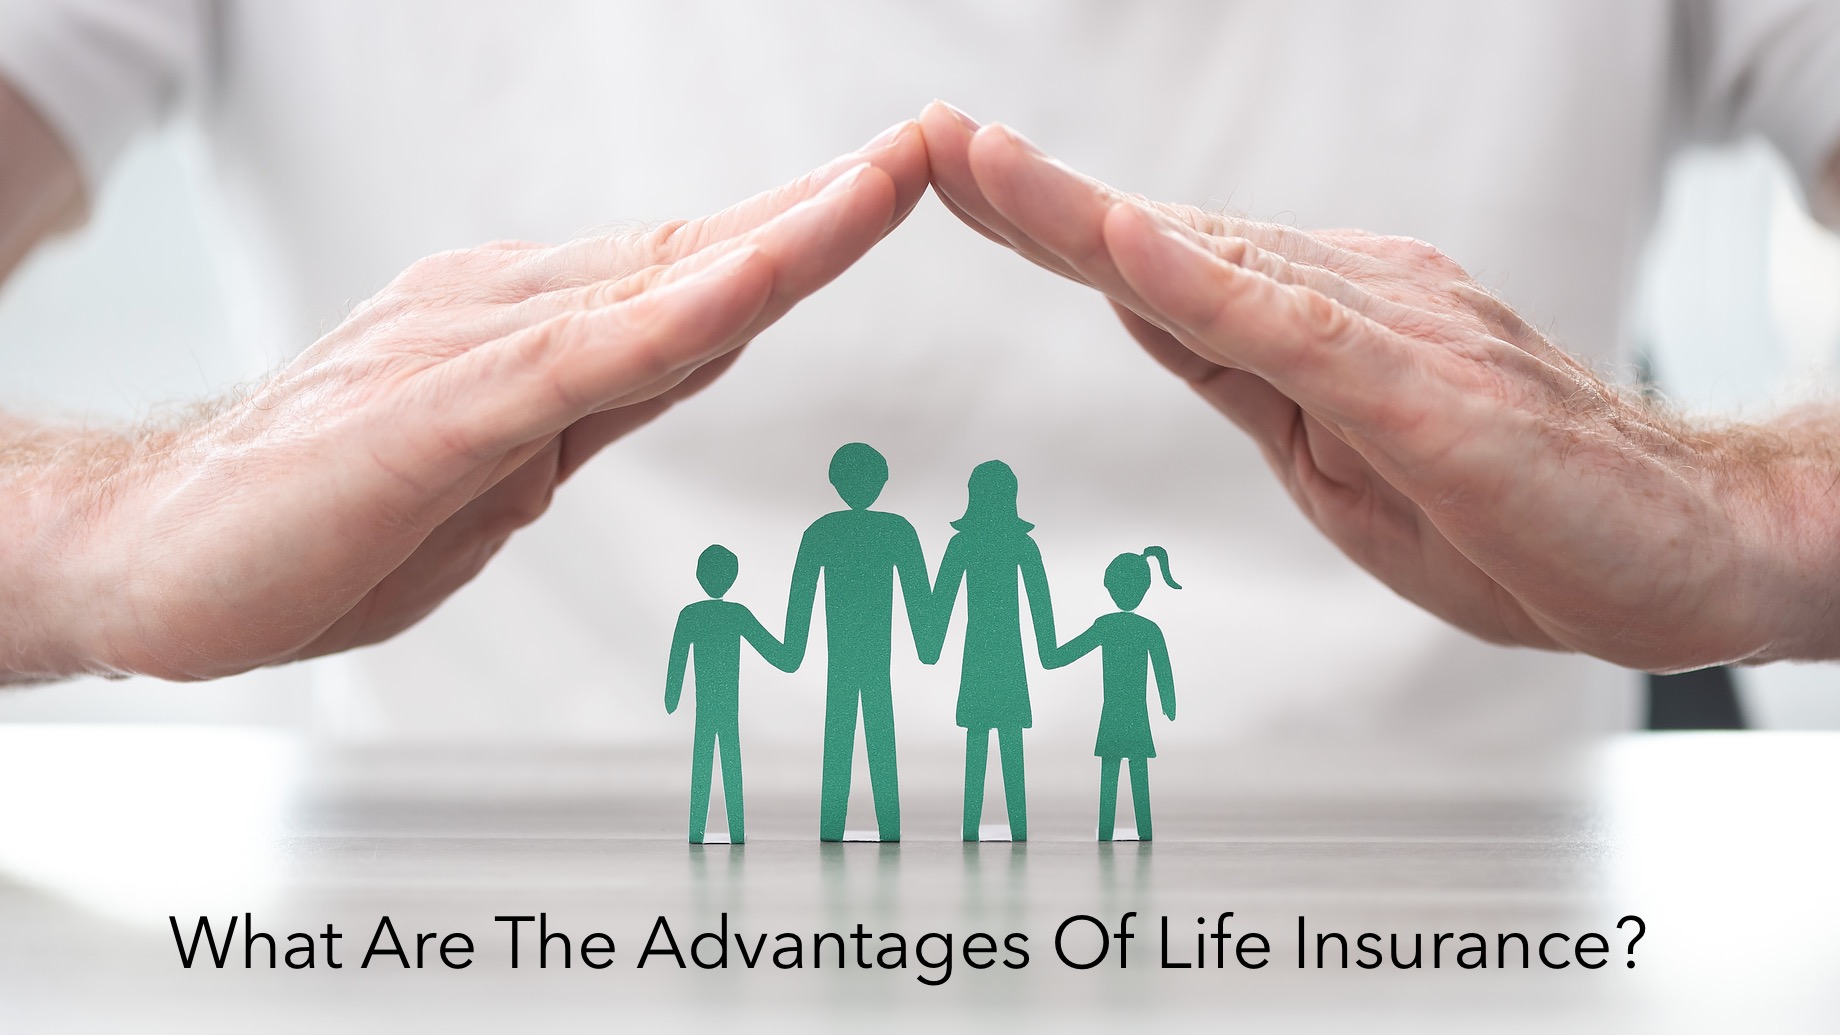 What Are The Advantages Of Life Insurance?